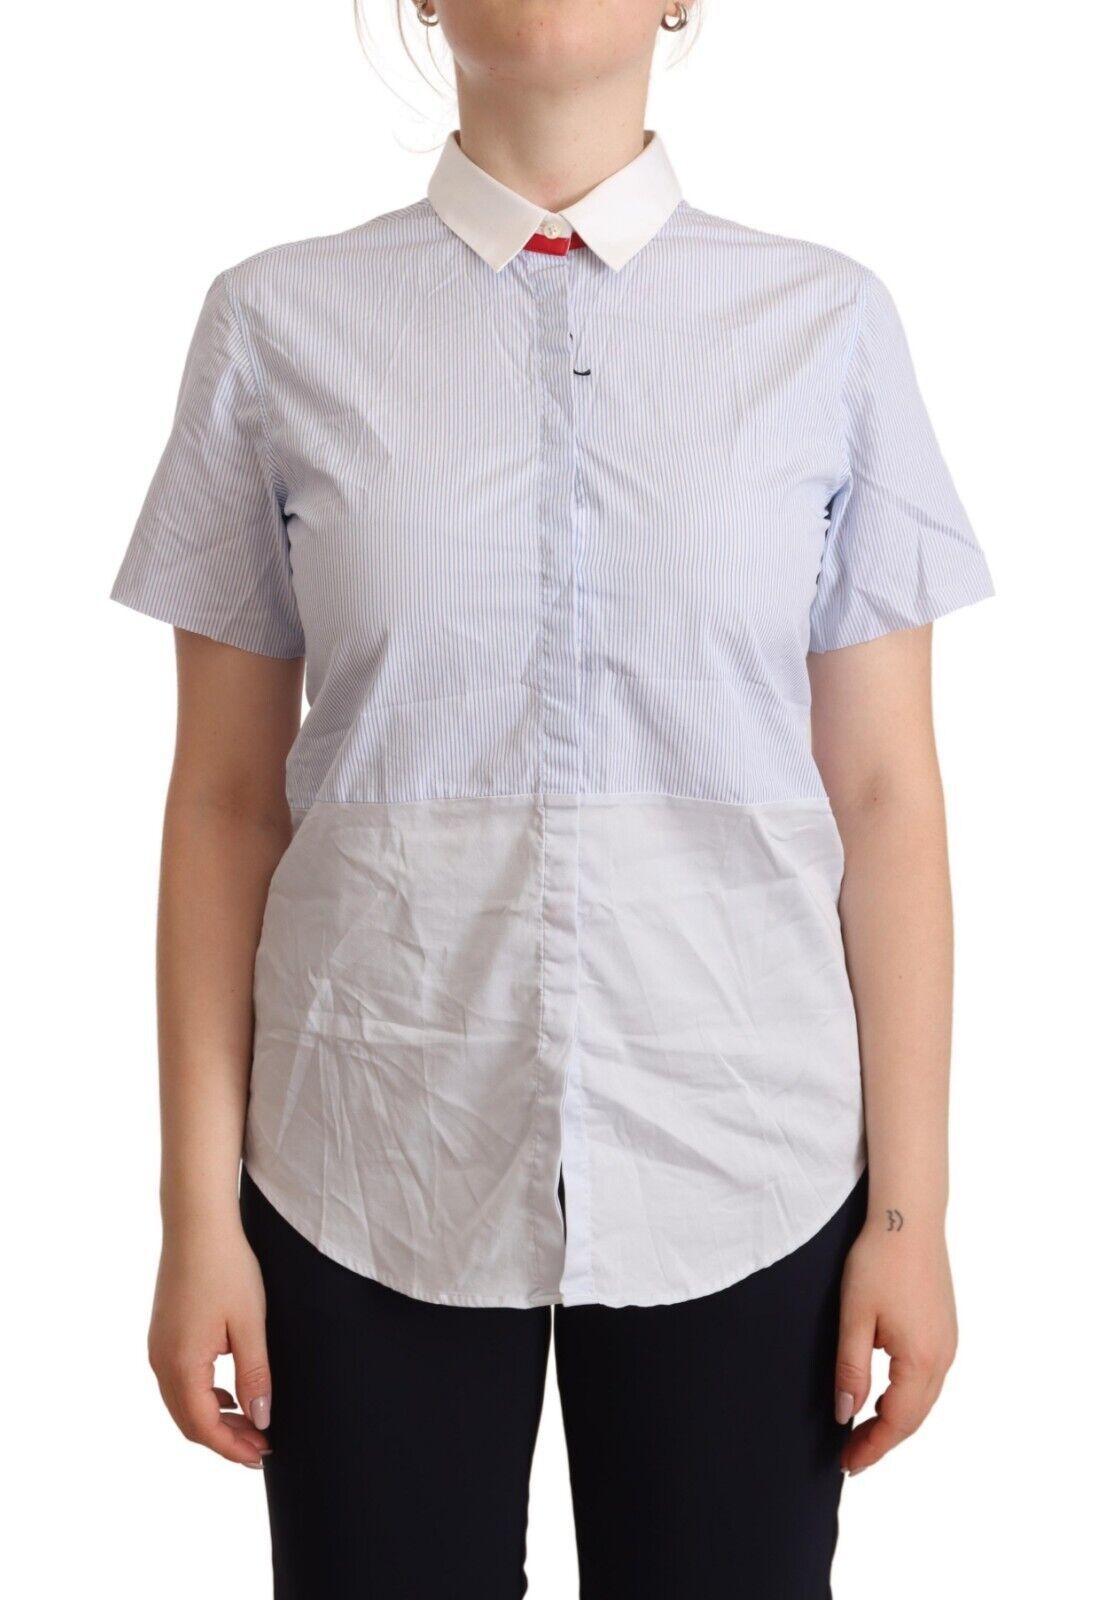 Light Blue Cotton Short Sleeves Collared Polo Top